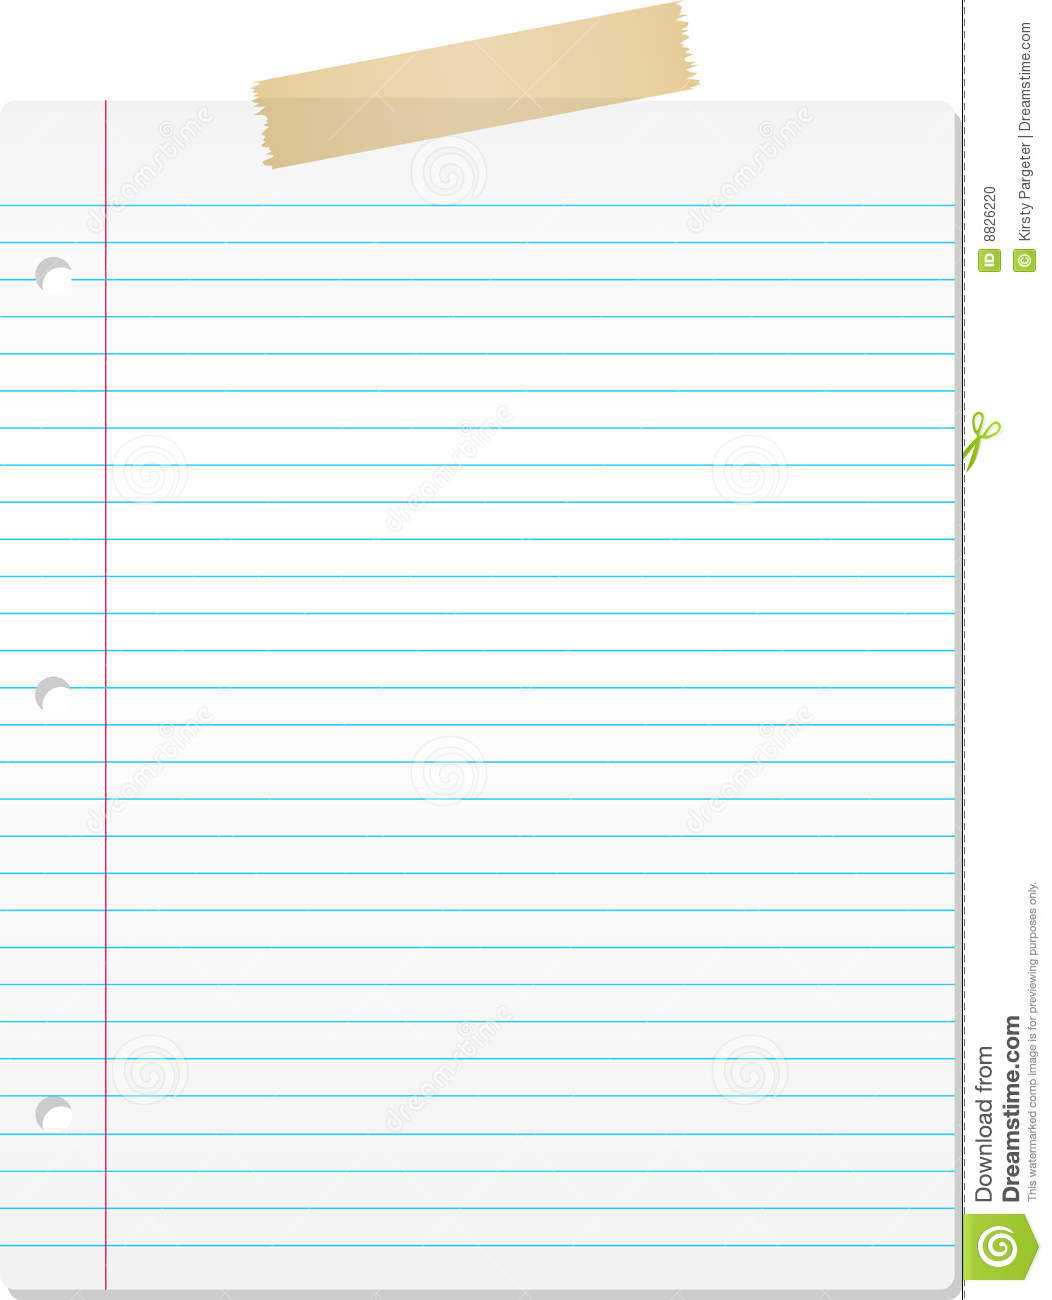 026 Microsoft Word Lined Paper Template Ideas Fantastic For Inside Notebook Paper Template For Word